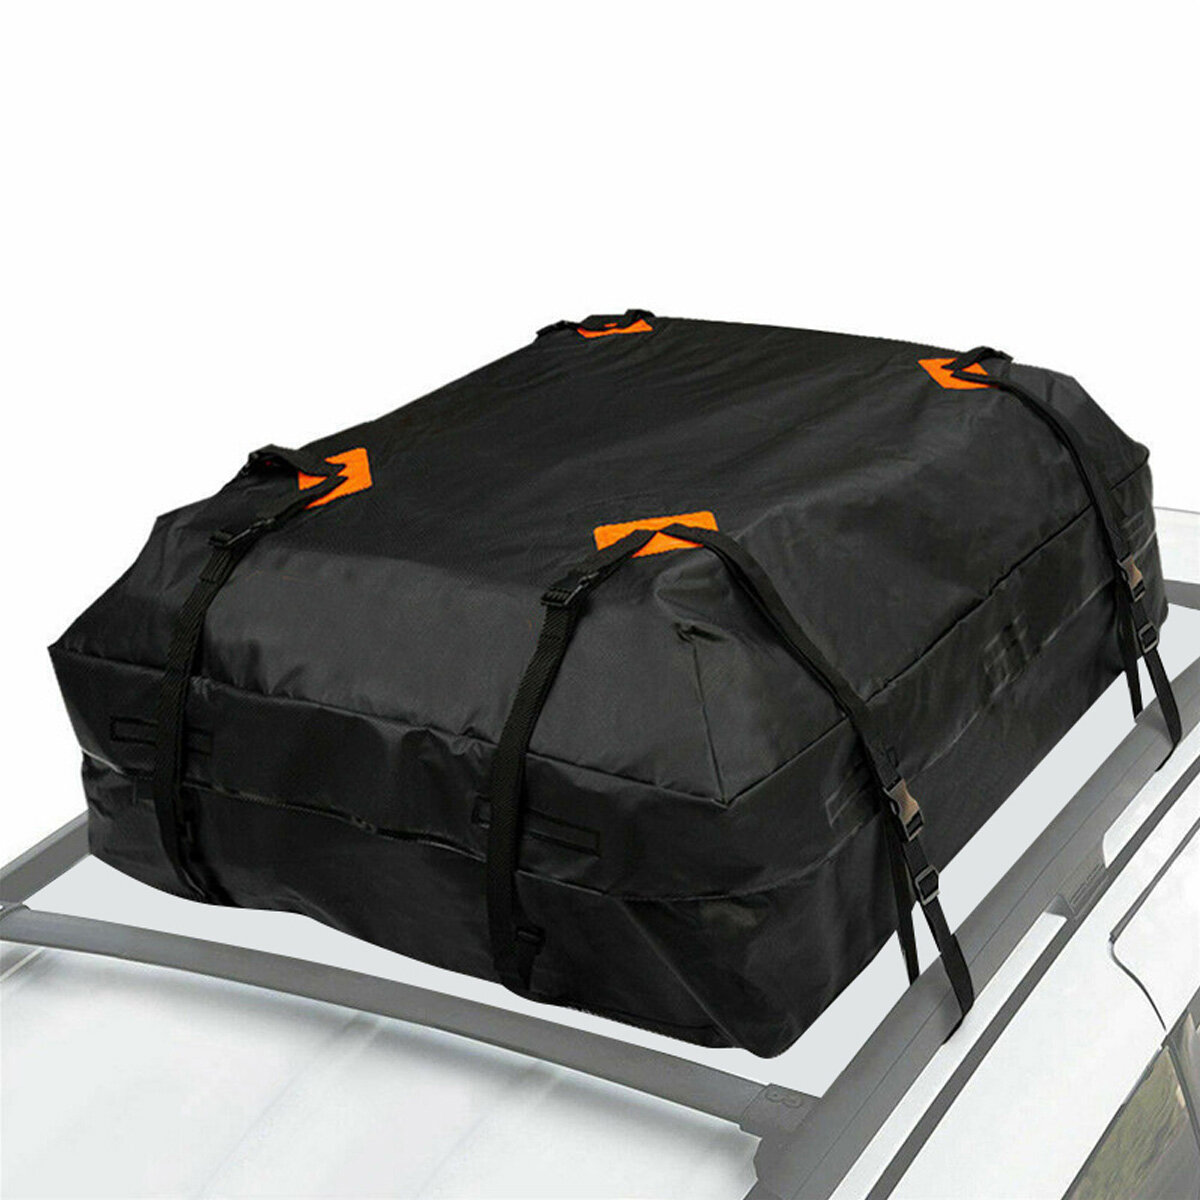 Image of 475L Car Rooftop Cargo Bag 420D Waterproof Car Top Carrier Bag Luggage Storage for Outdoor Travel Carrier